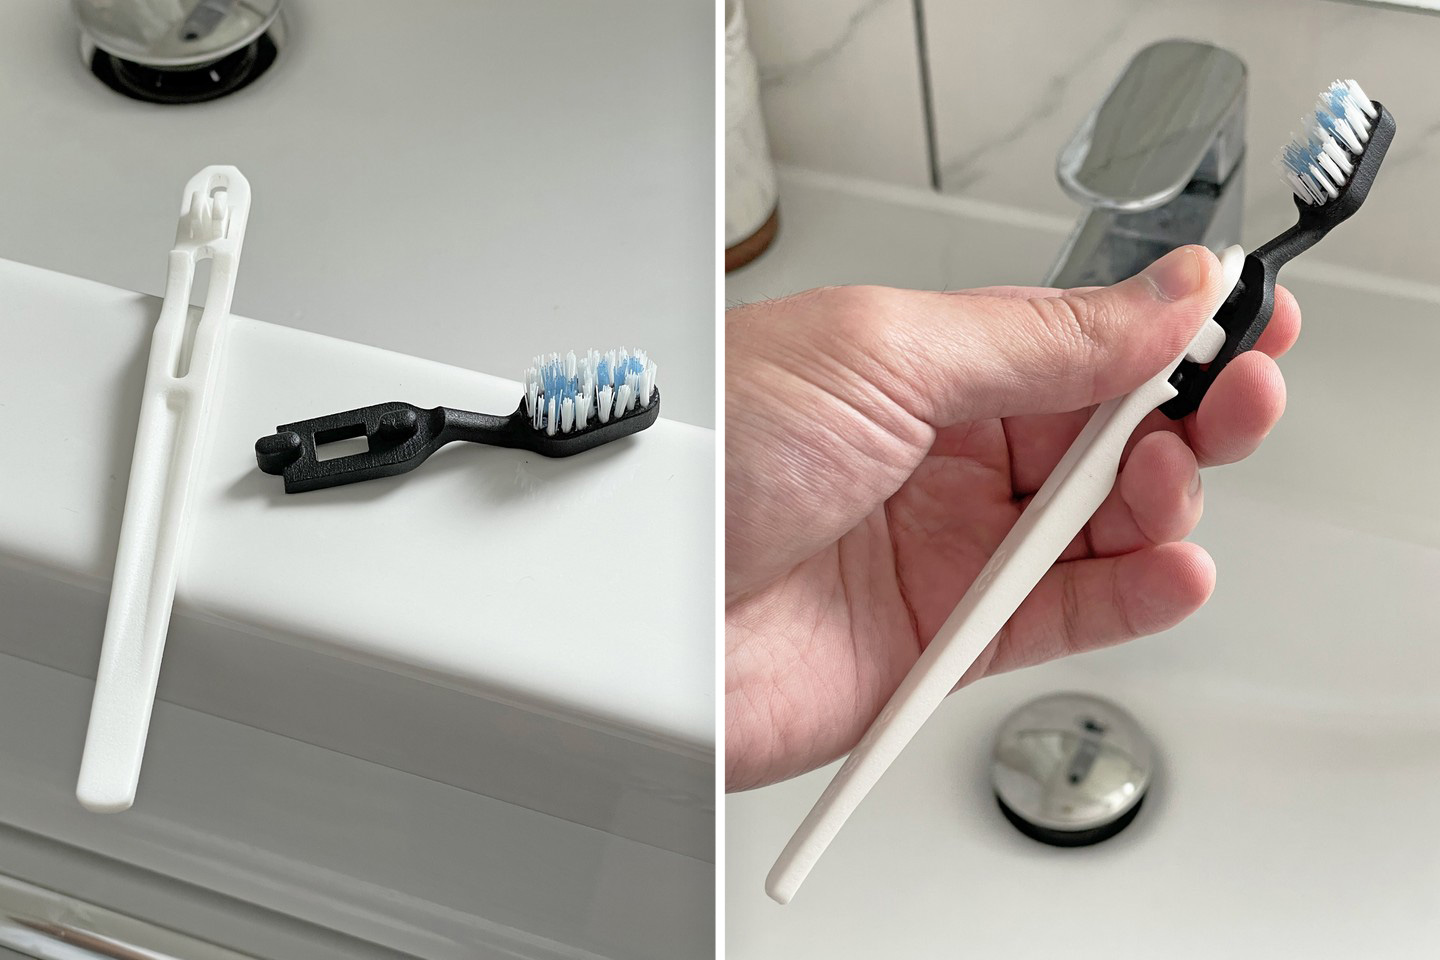 #Sustainably designed toothbrush features a small replaceable head to minimize plastic waste